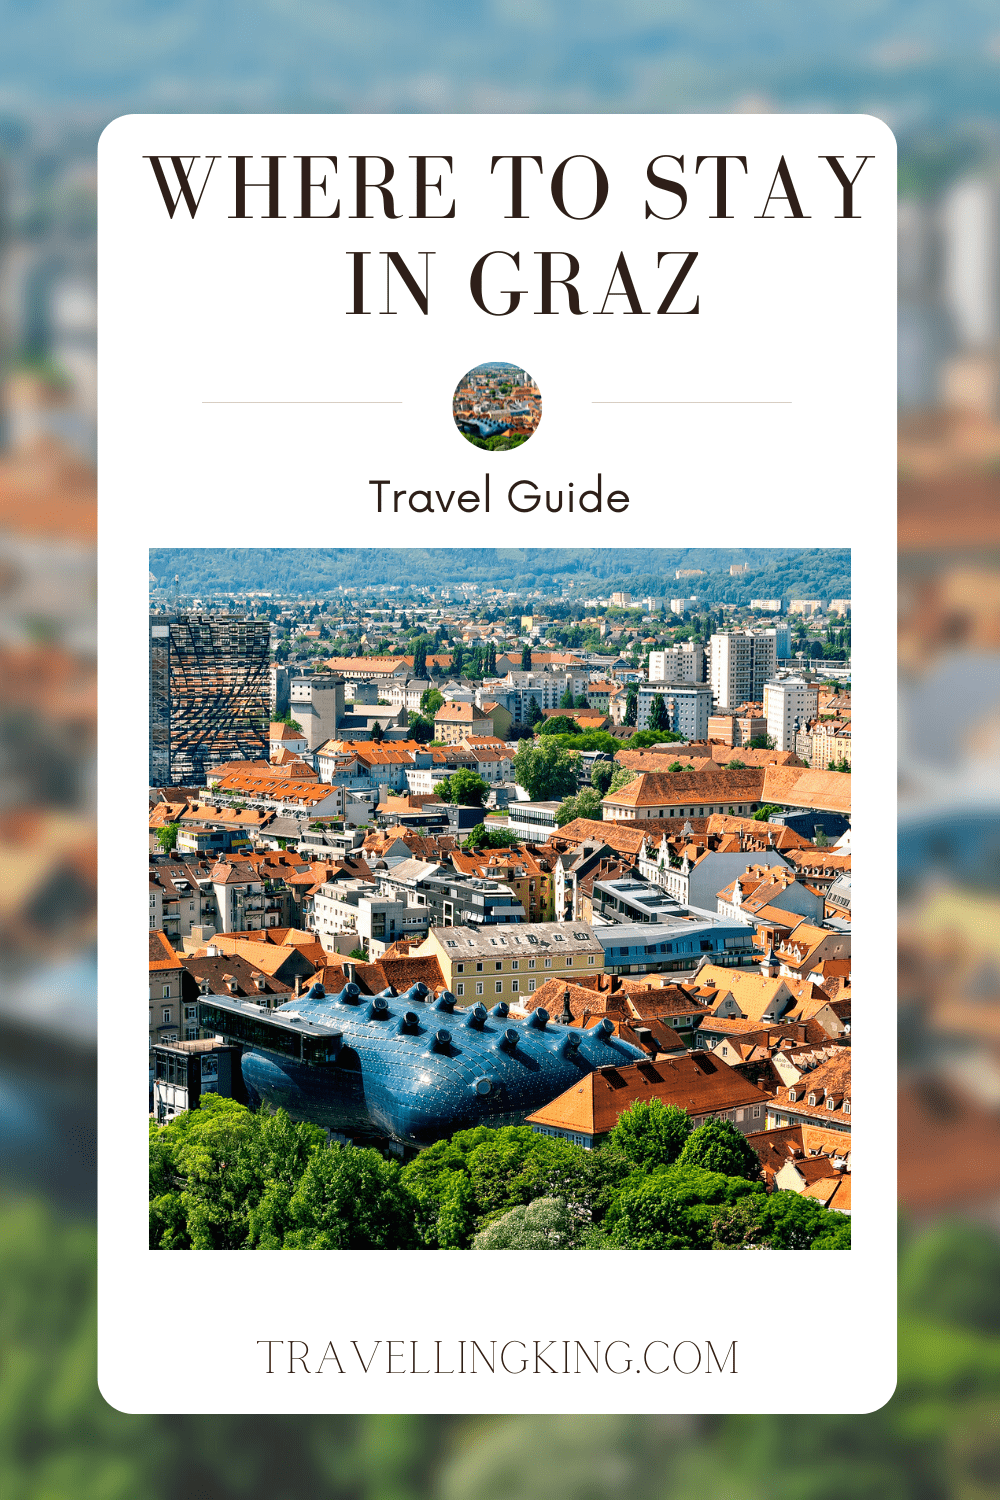 Where to stay in Graz